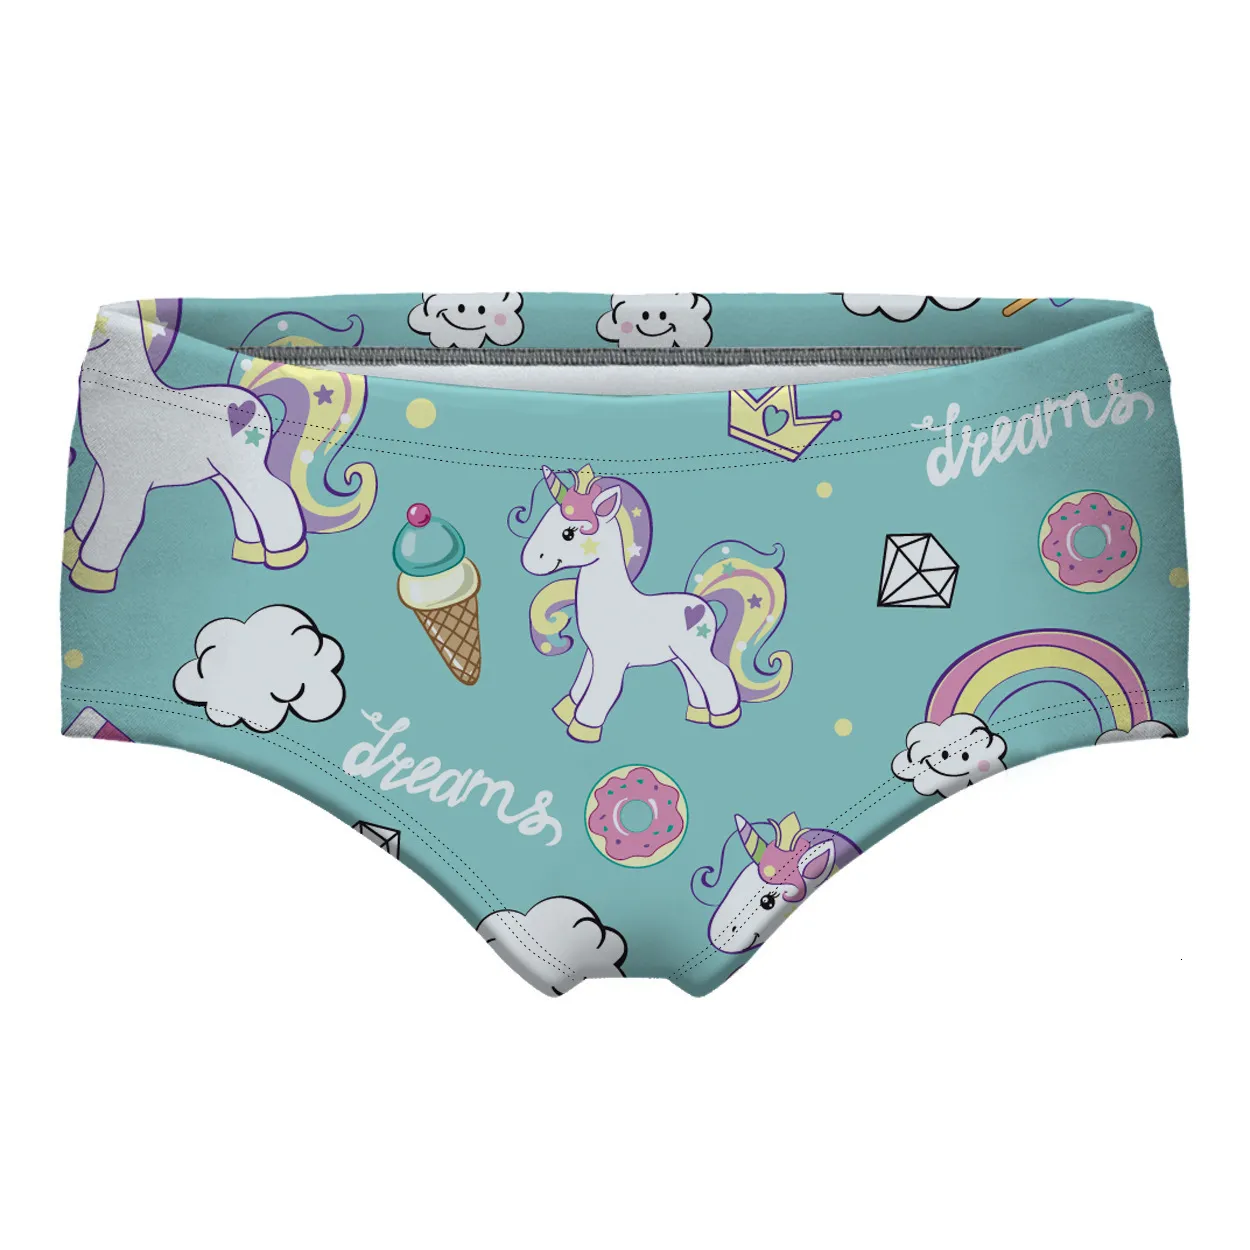 Adult Baby DDLG/ABDL Underwear Comfortable Cotton Briefs For Age Play,  Little Big Dynamic Colorful And Playful Panties From Mu02, $13.33